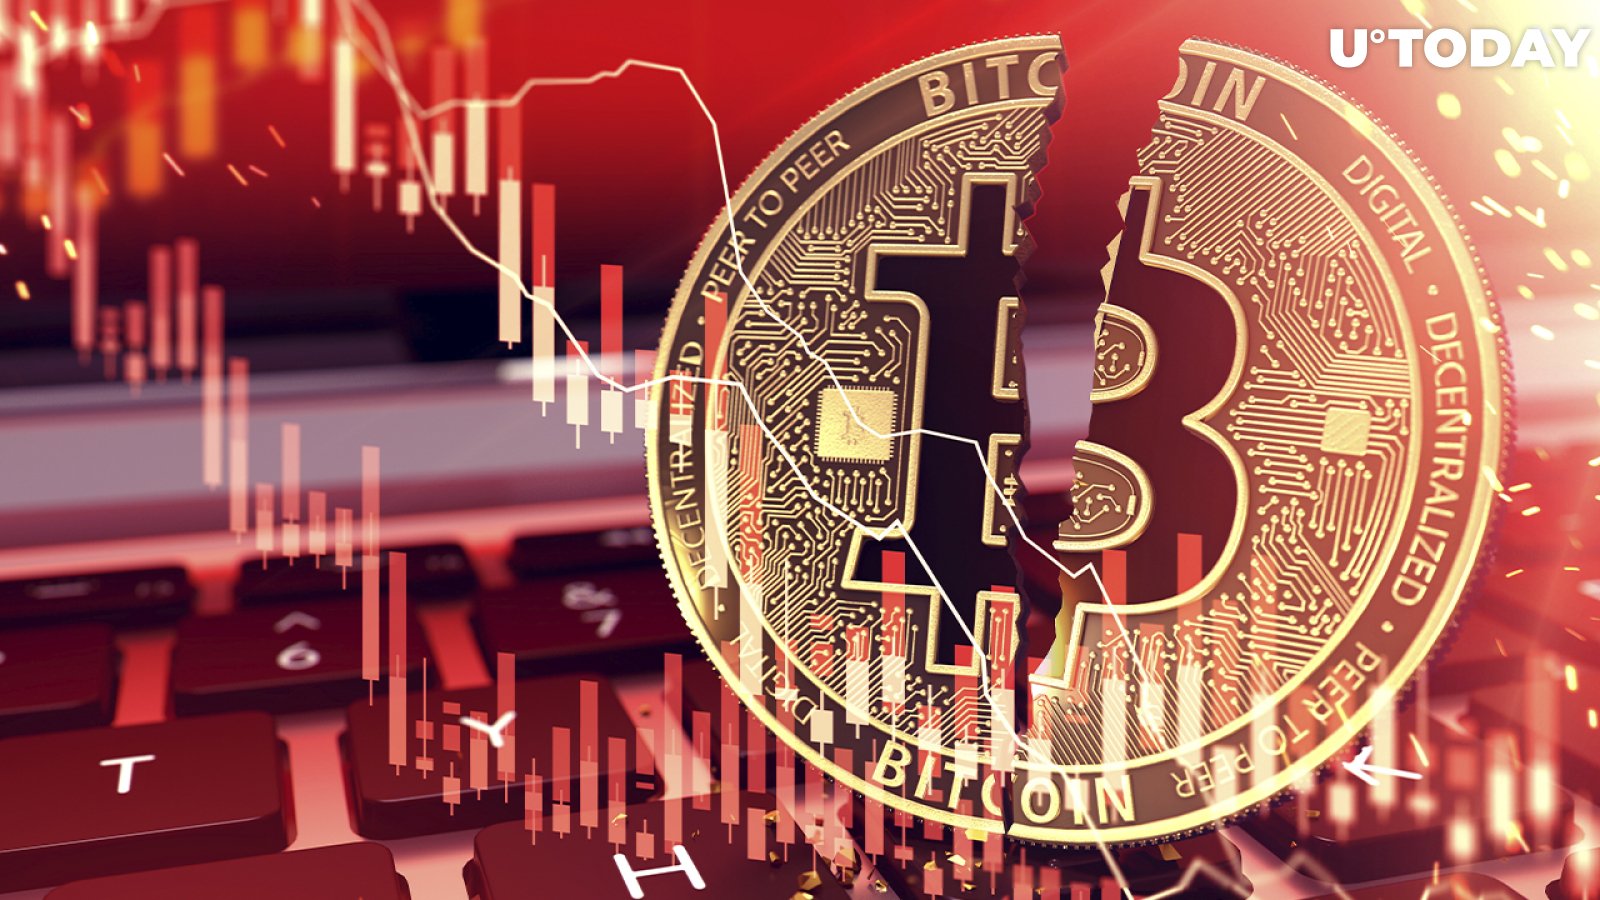 Bitcoin's Profitability at Lowest Point in 2 Years